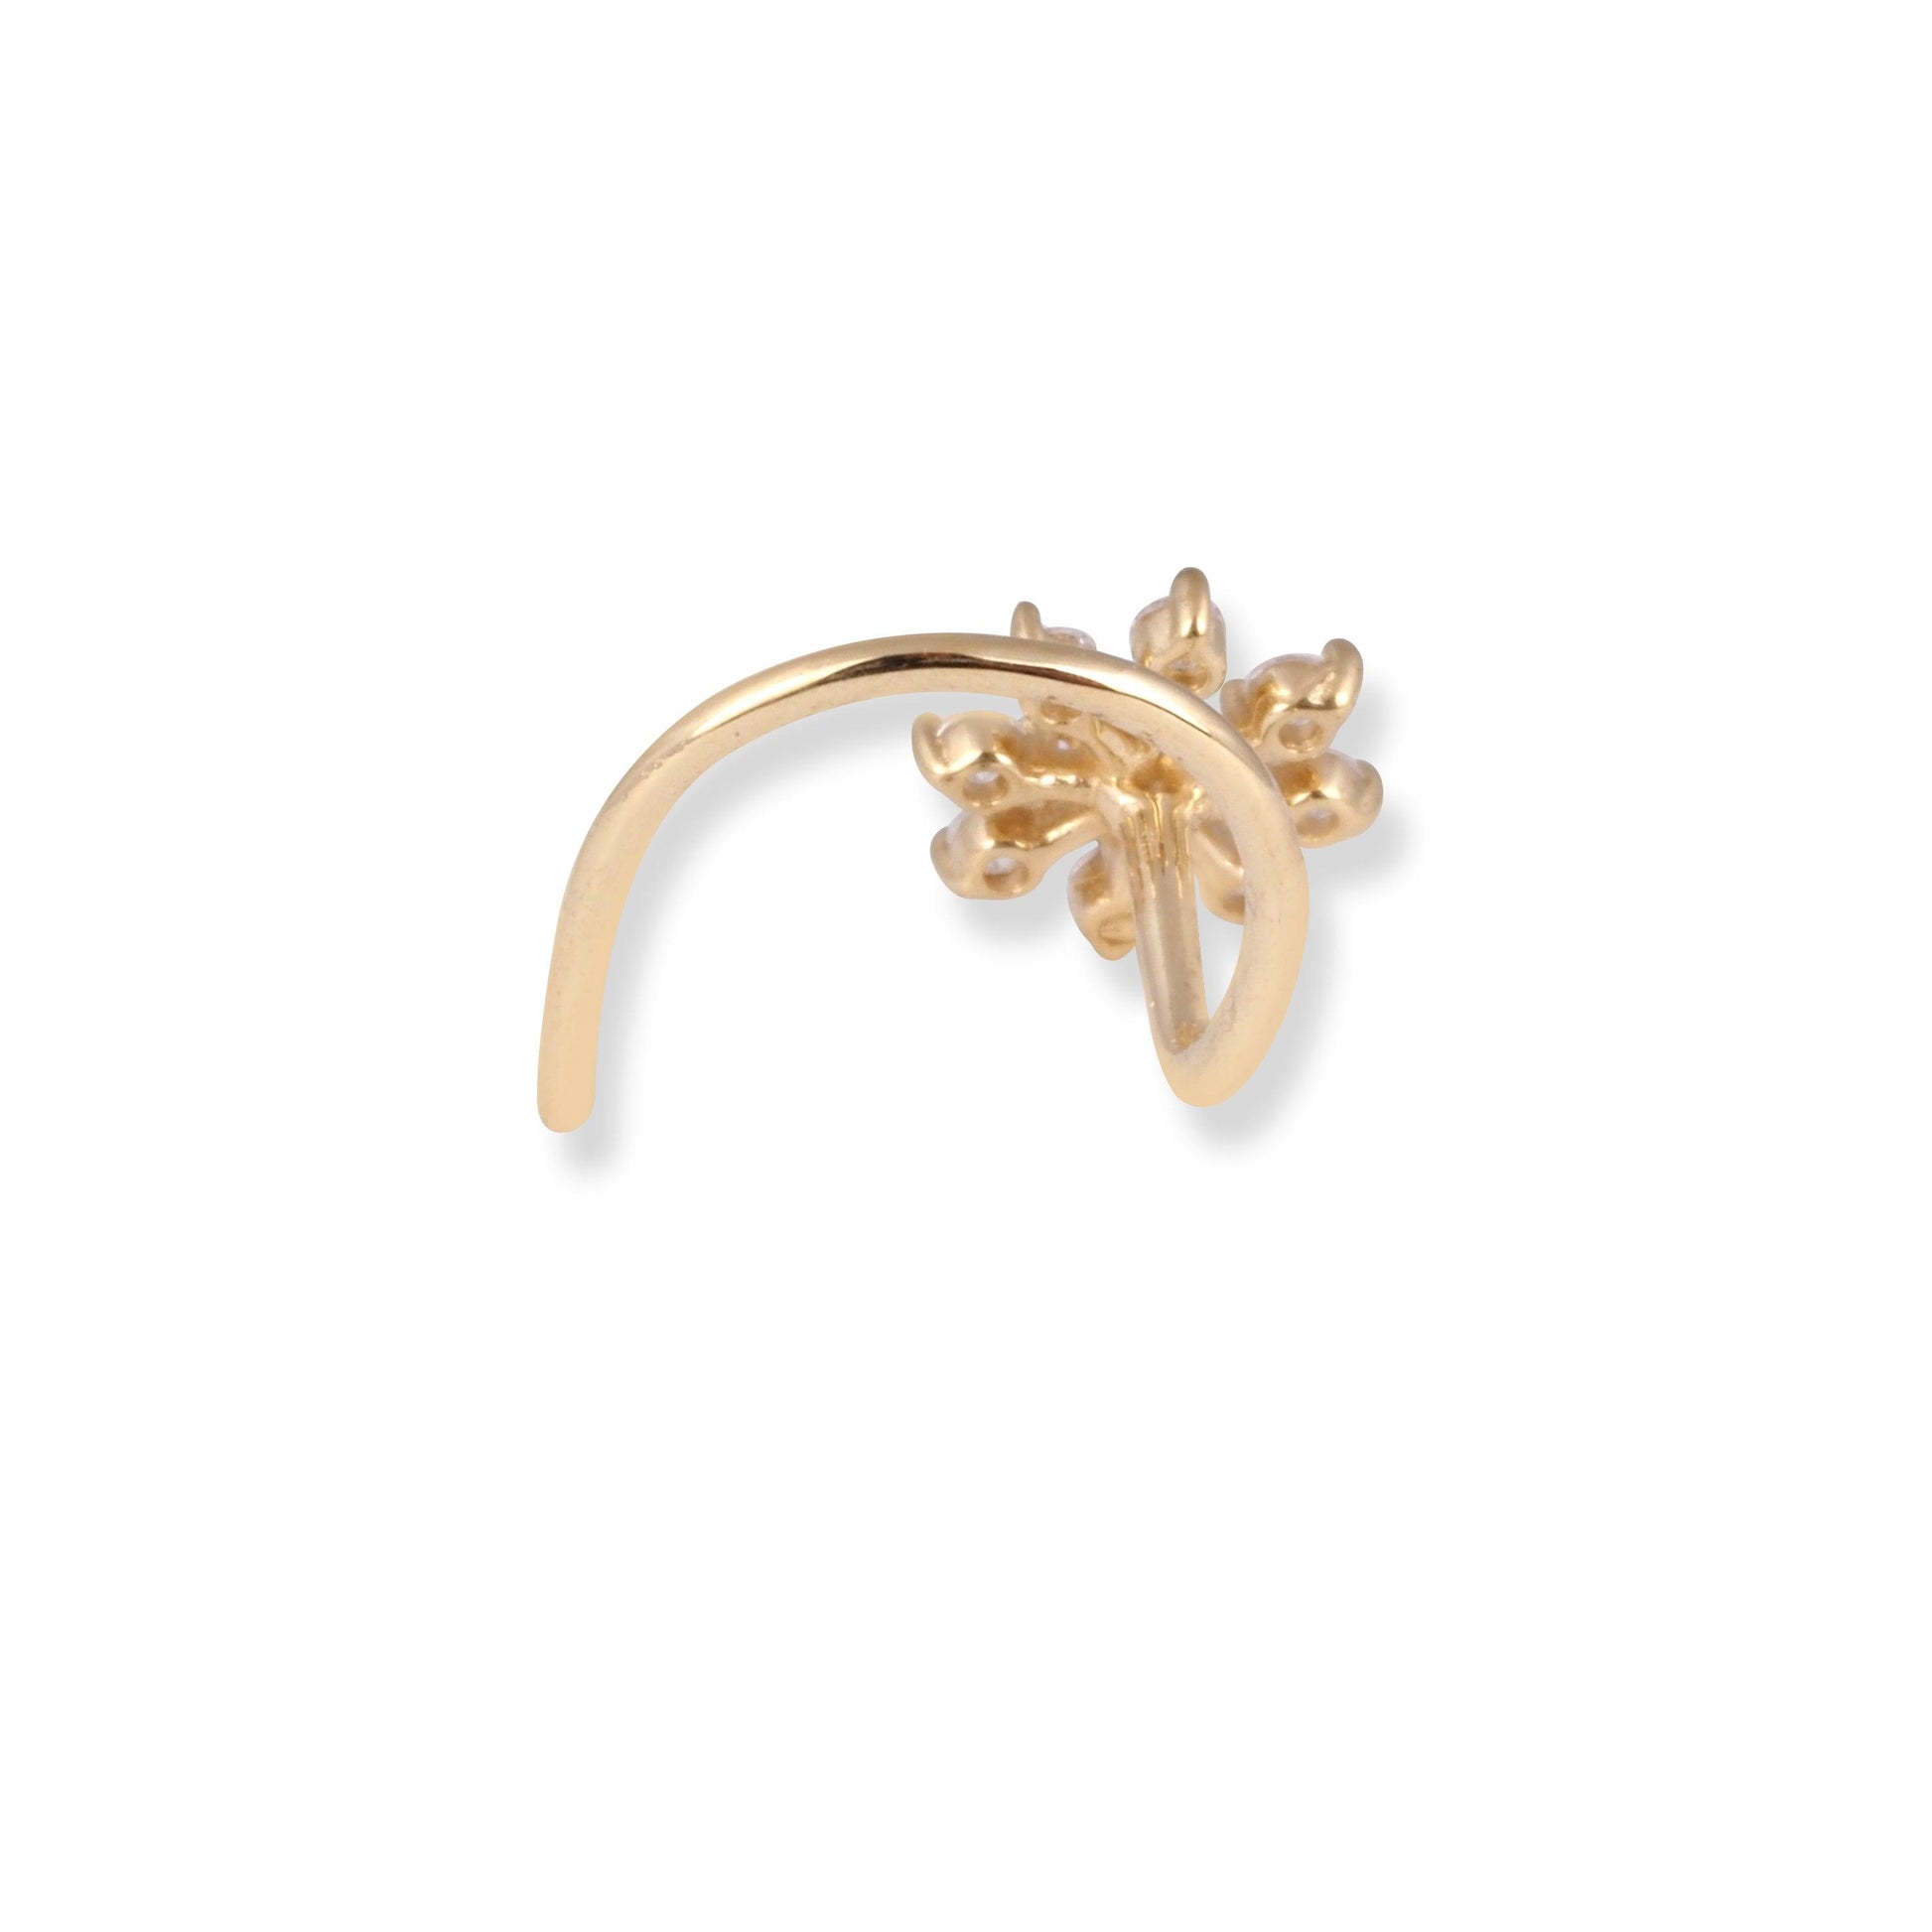 18ct Yellow Gold Flower Design Wire Back Nose Stud with 9 White Cubic Zirconia Stones NS-7573 - Minar Jewellers